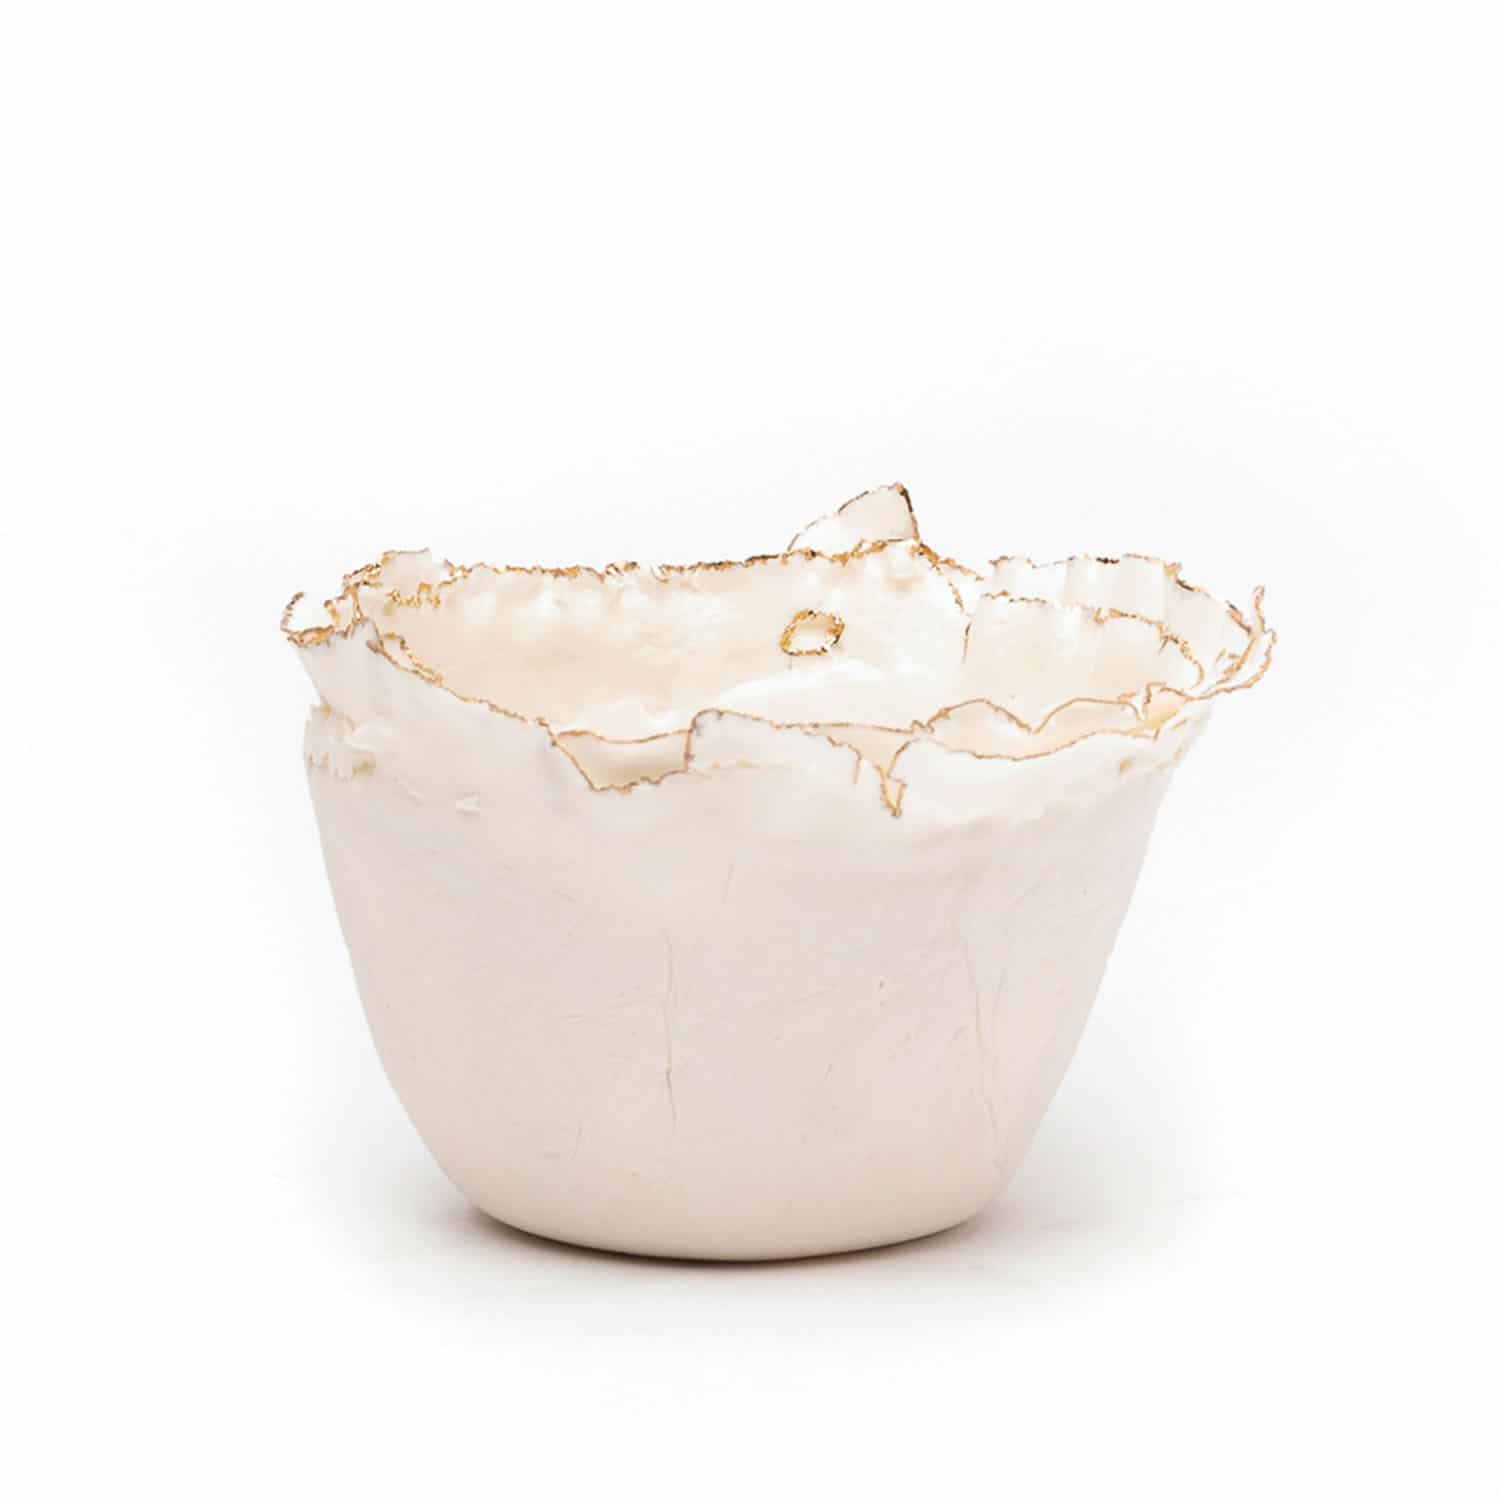 Luxury White and Gold Porcelain Bowl